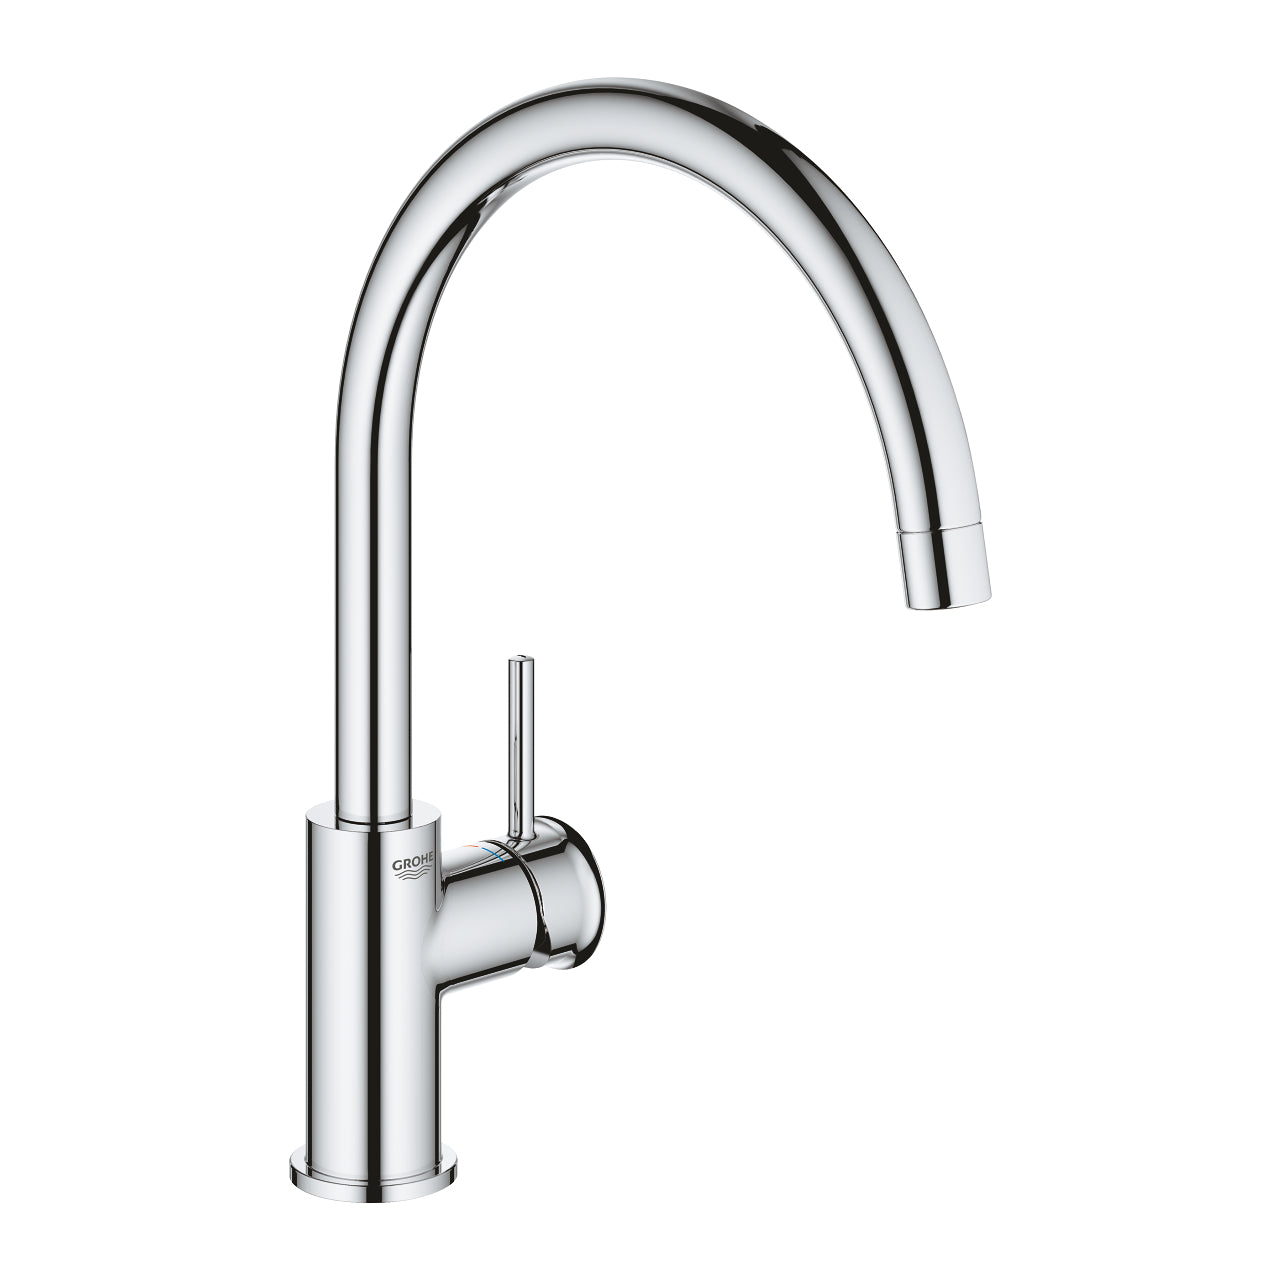 Grohe Bauclassic Single Lever Sink Mixer 1 / 2 Inch